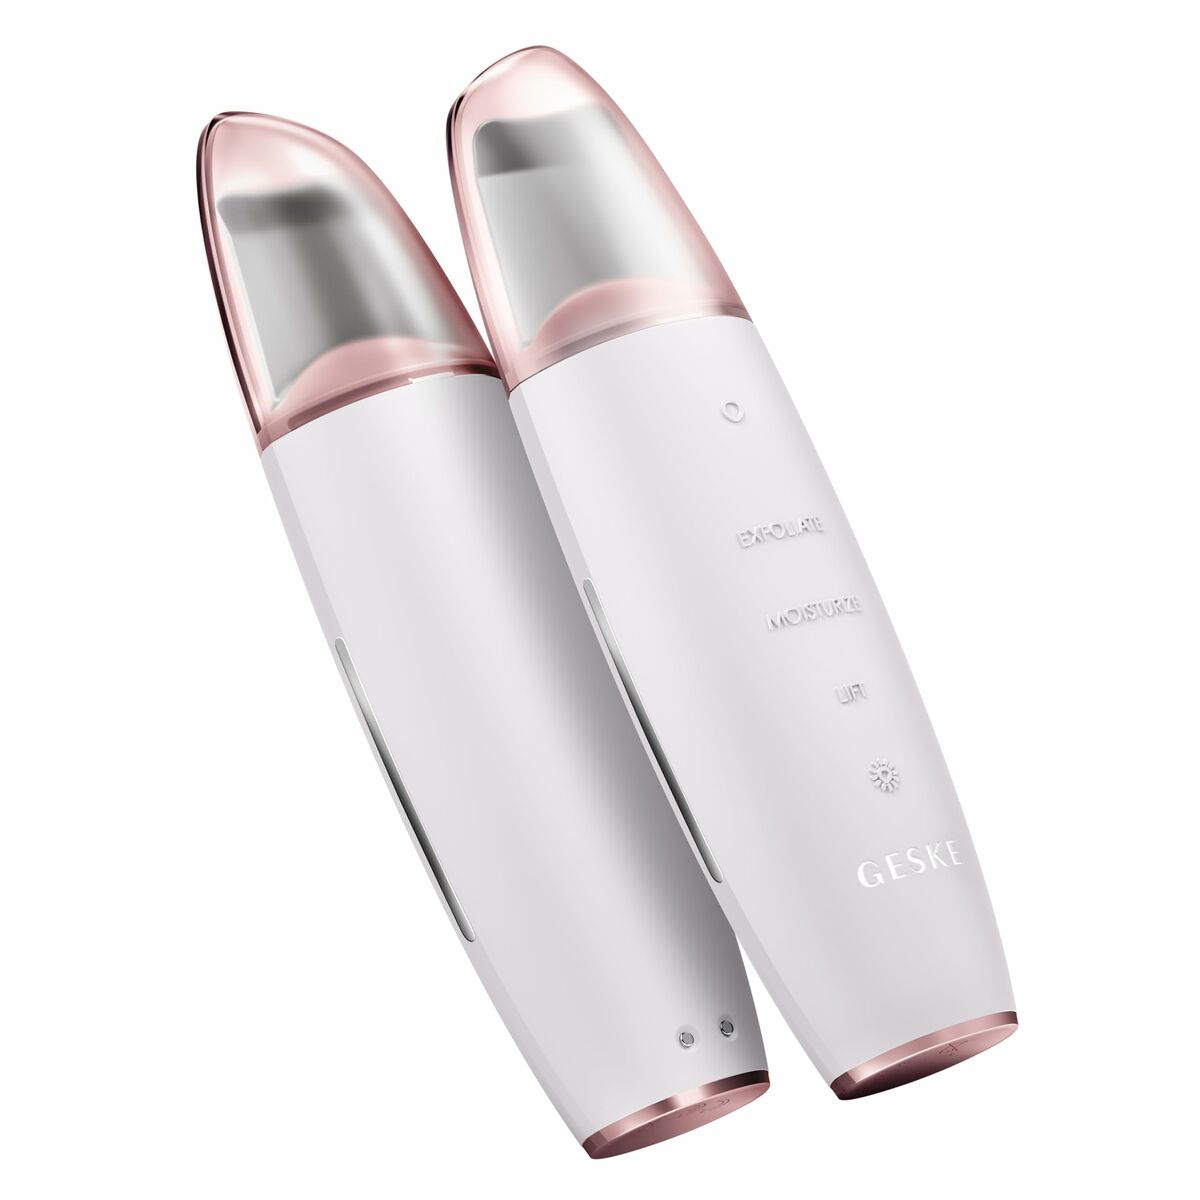 Cleansing and Exfoliating Brush Geske SmartAppGuided White 9-in-1